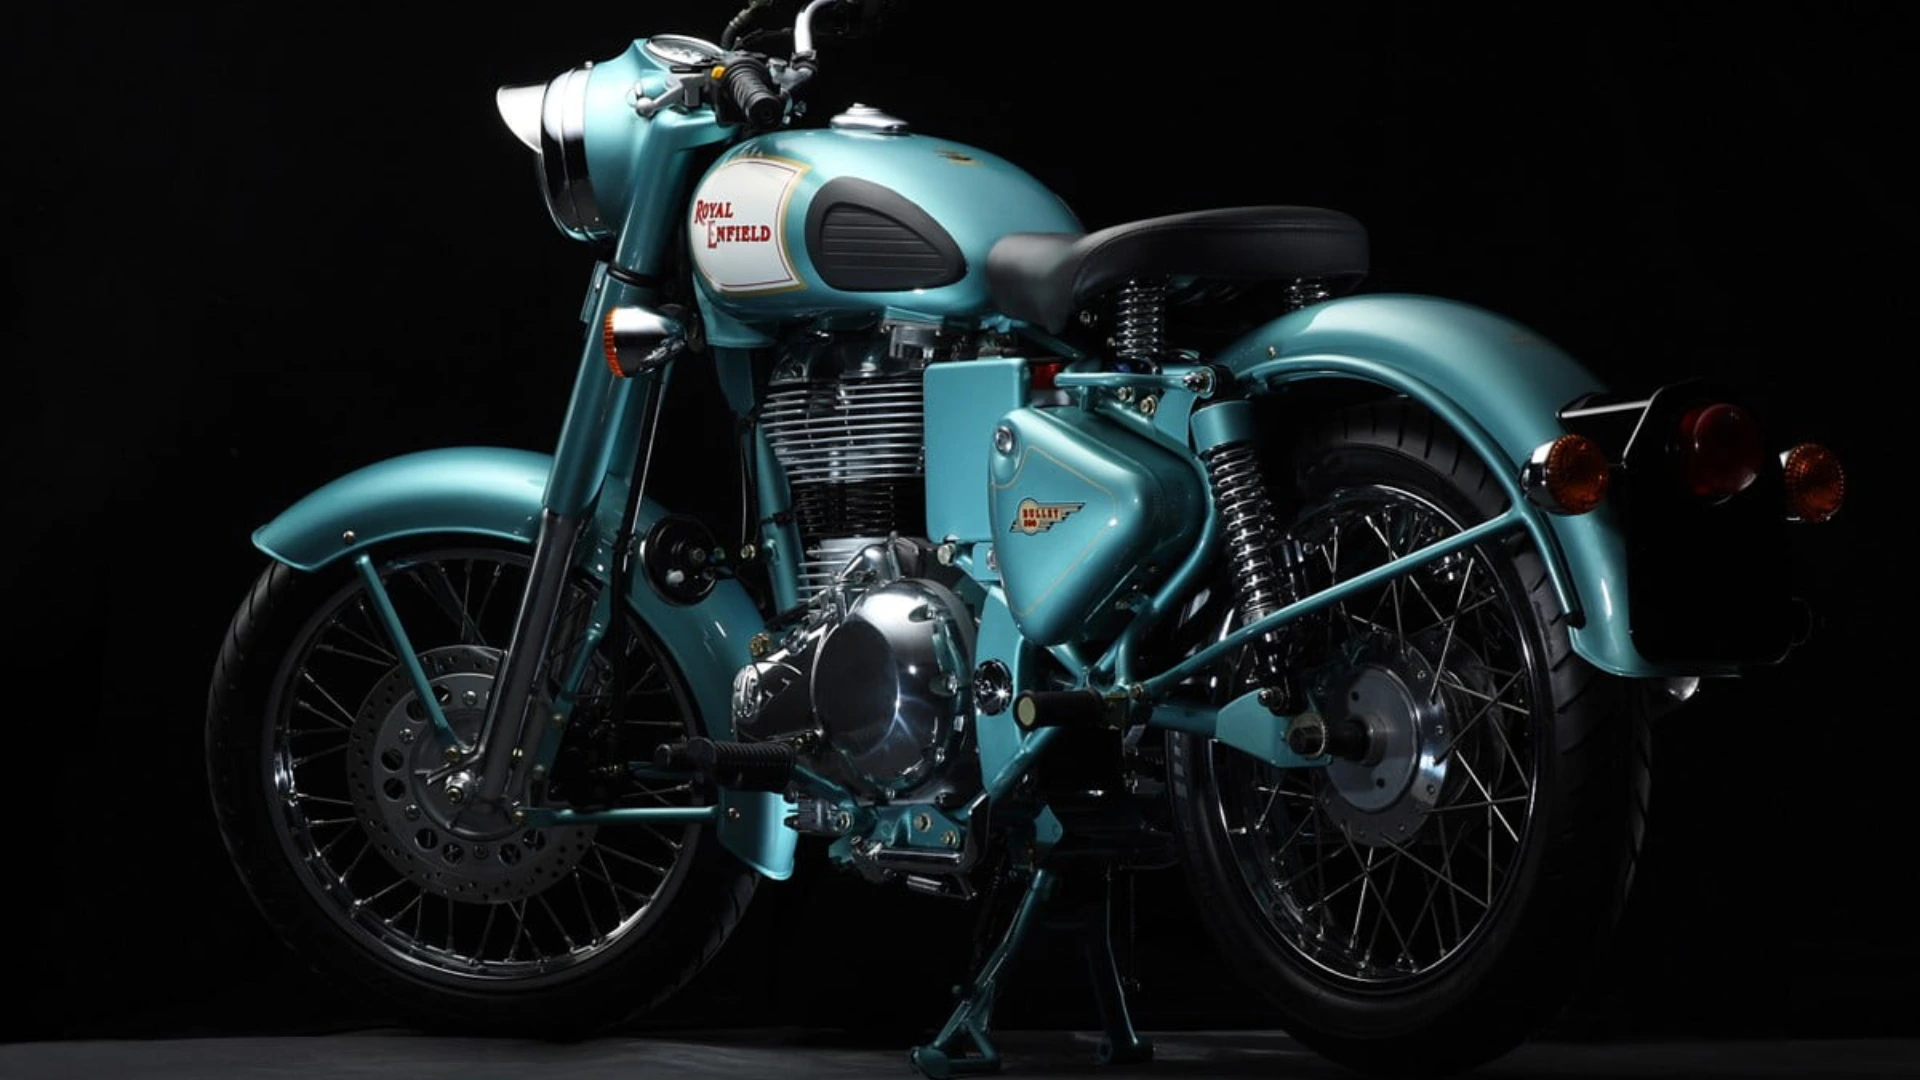 Upcoming Royal Enfield bike launches in 2023 and 2024